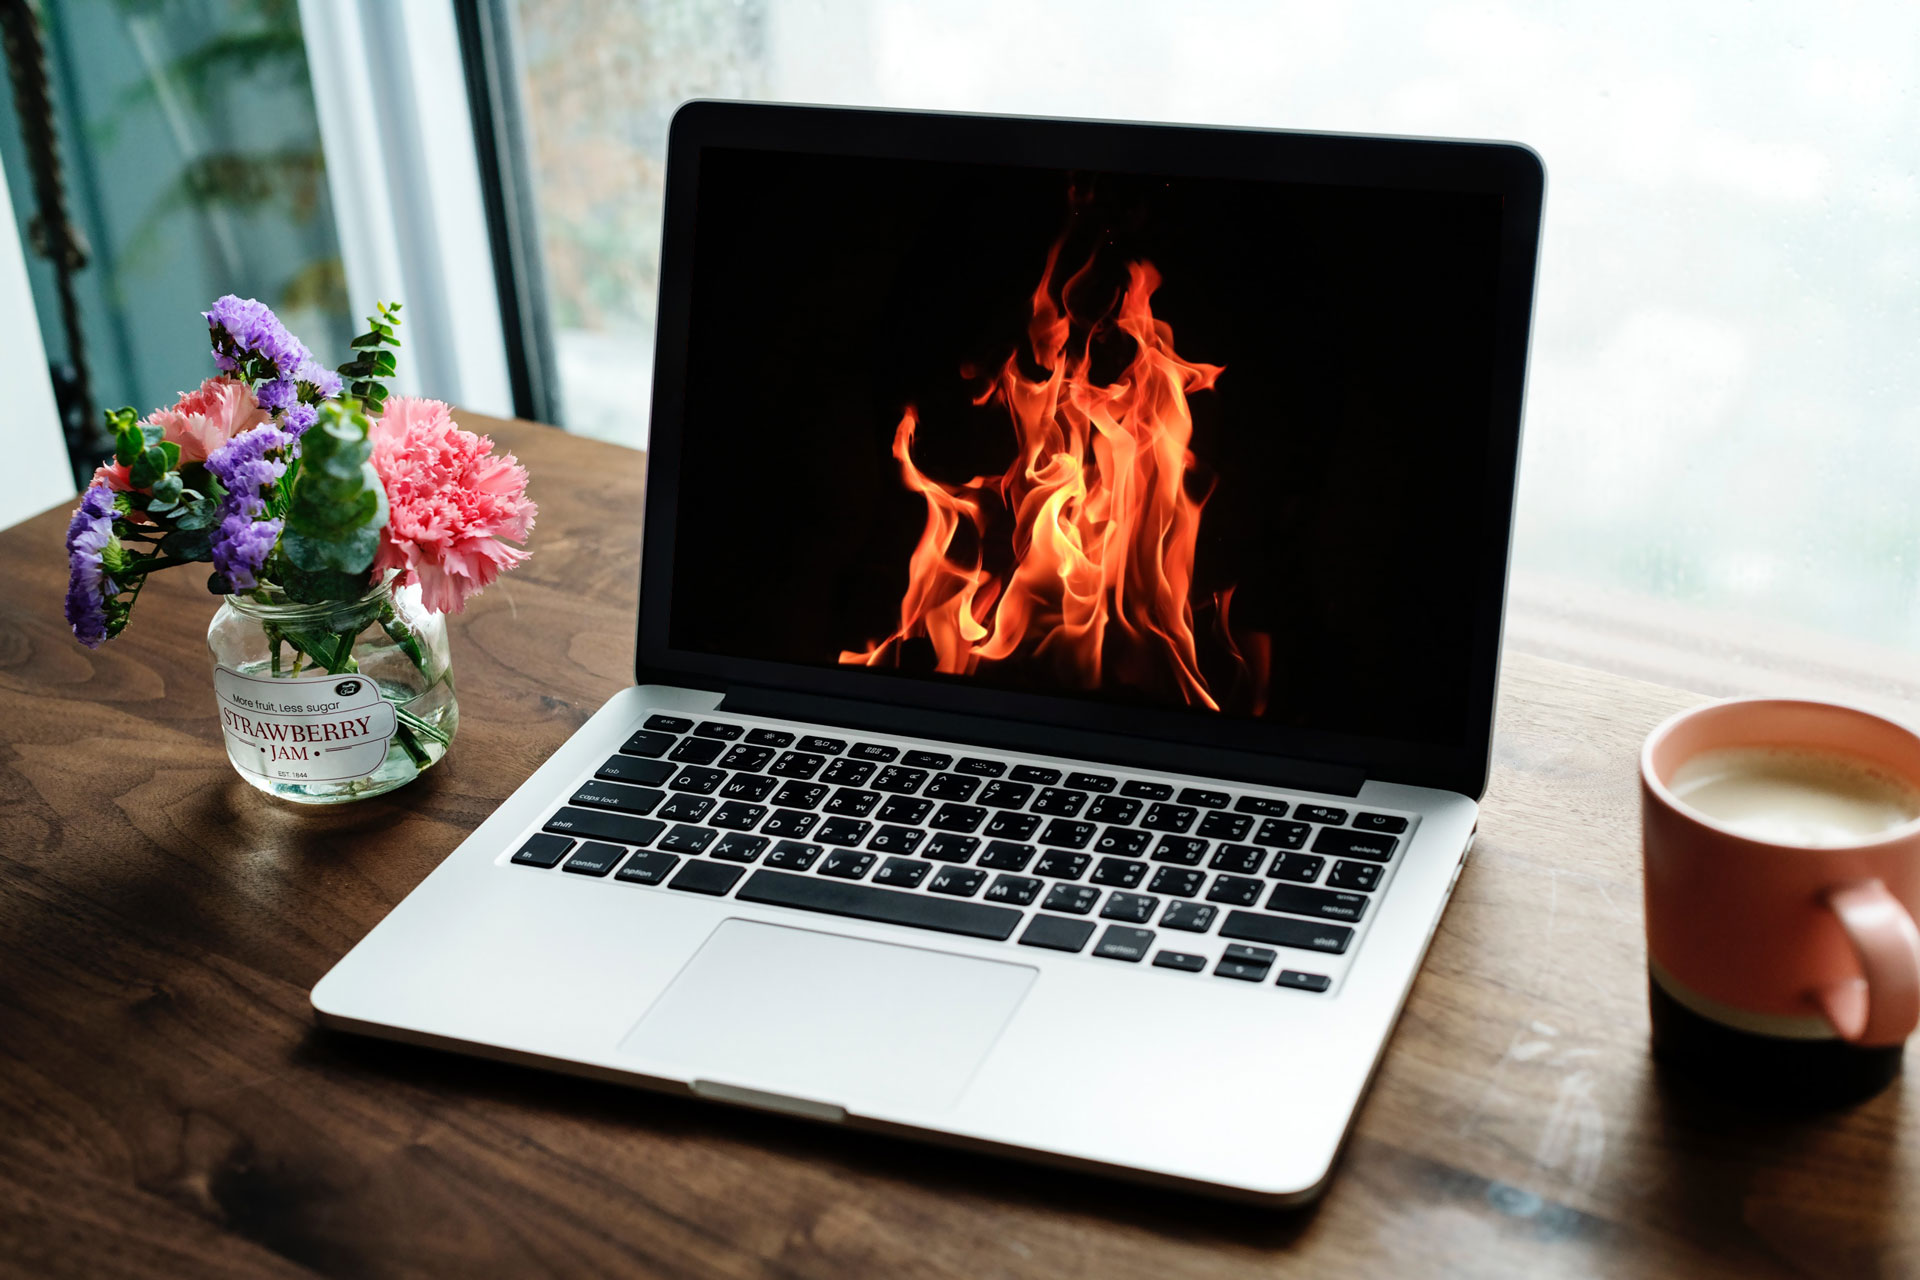 Prevent Your Laptop from Overheating